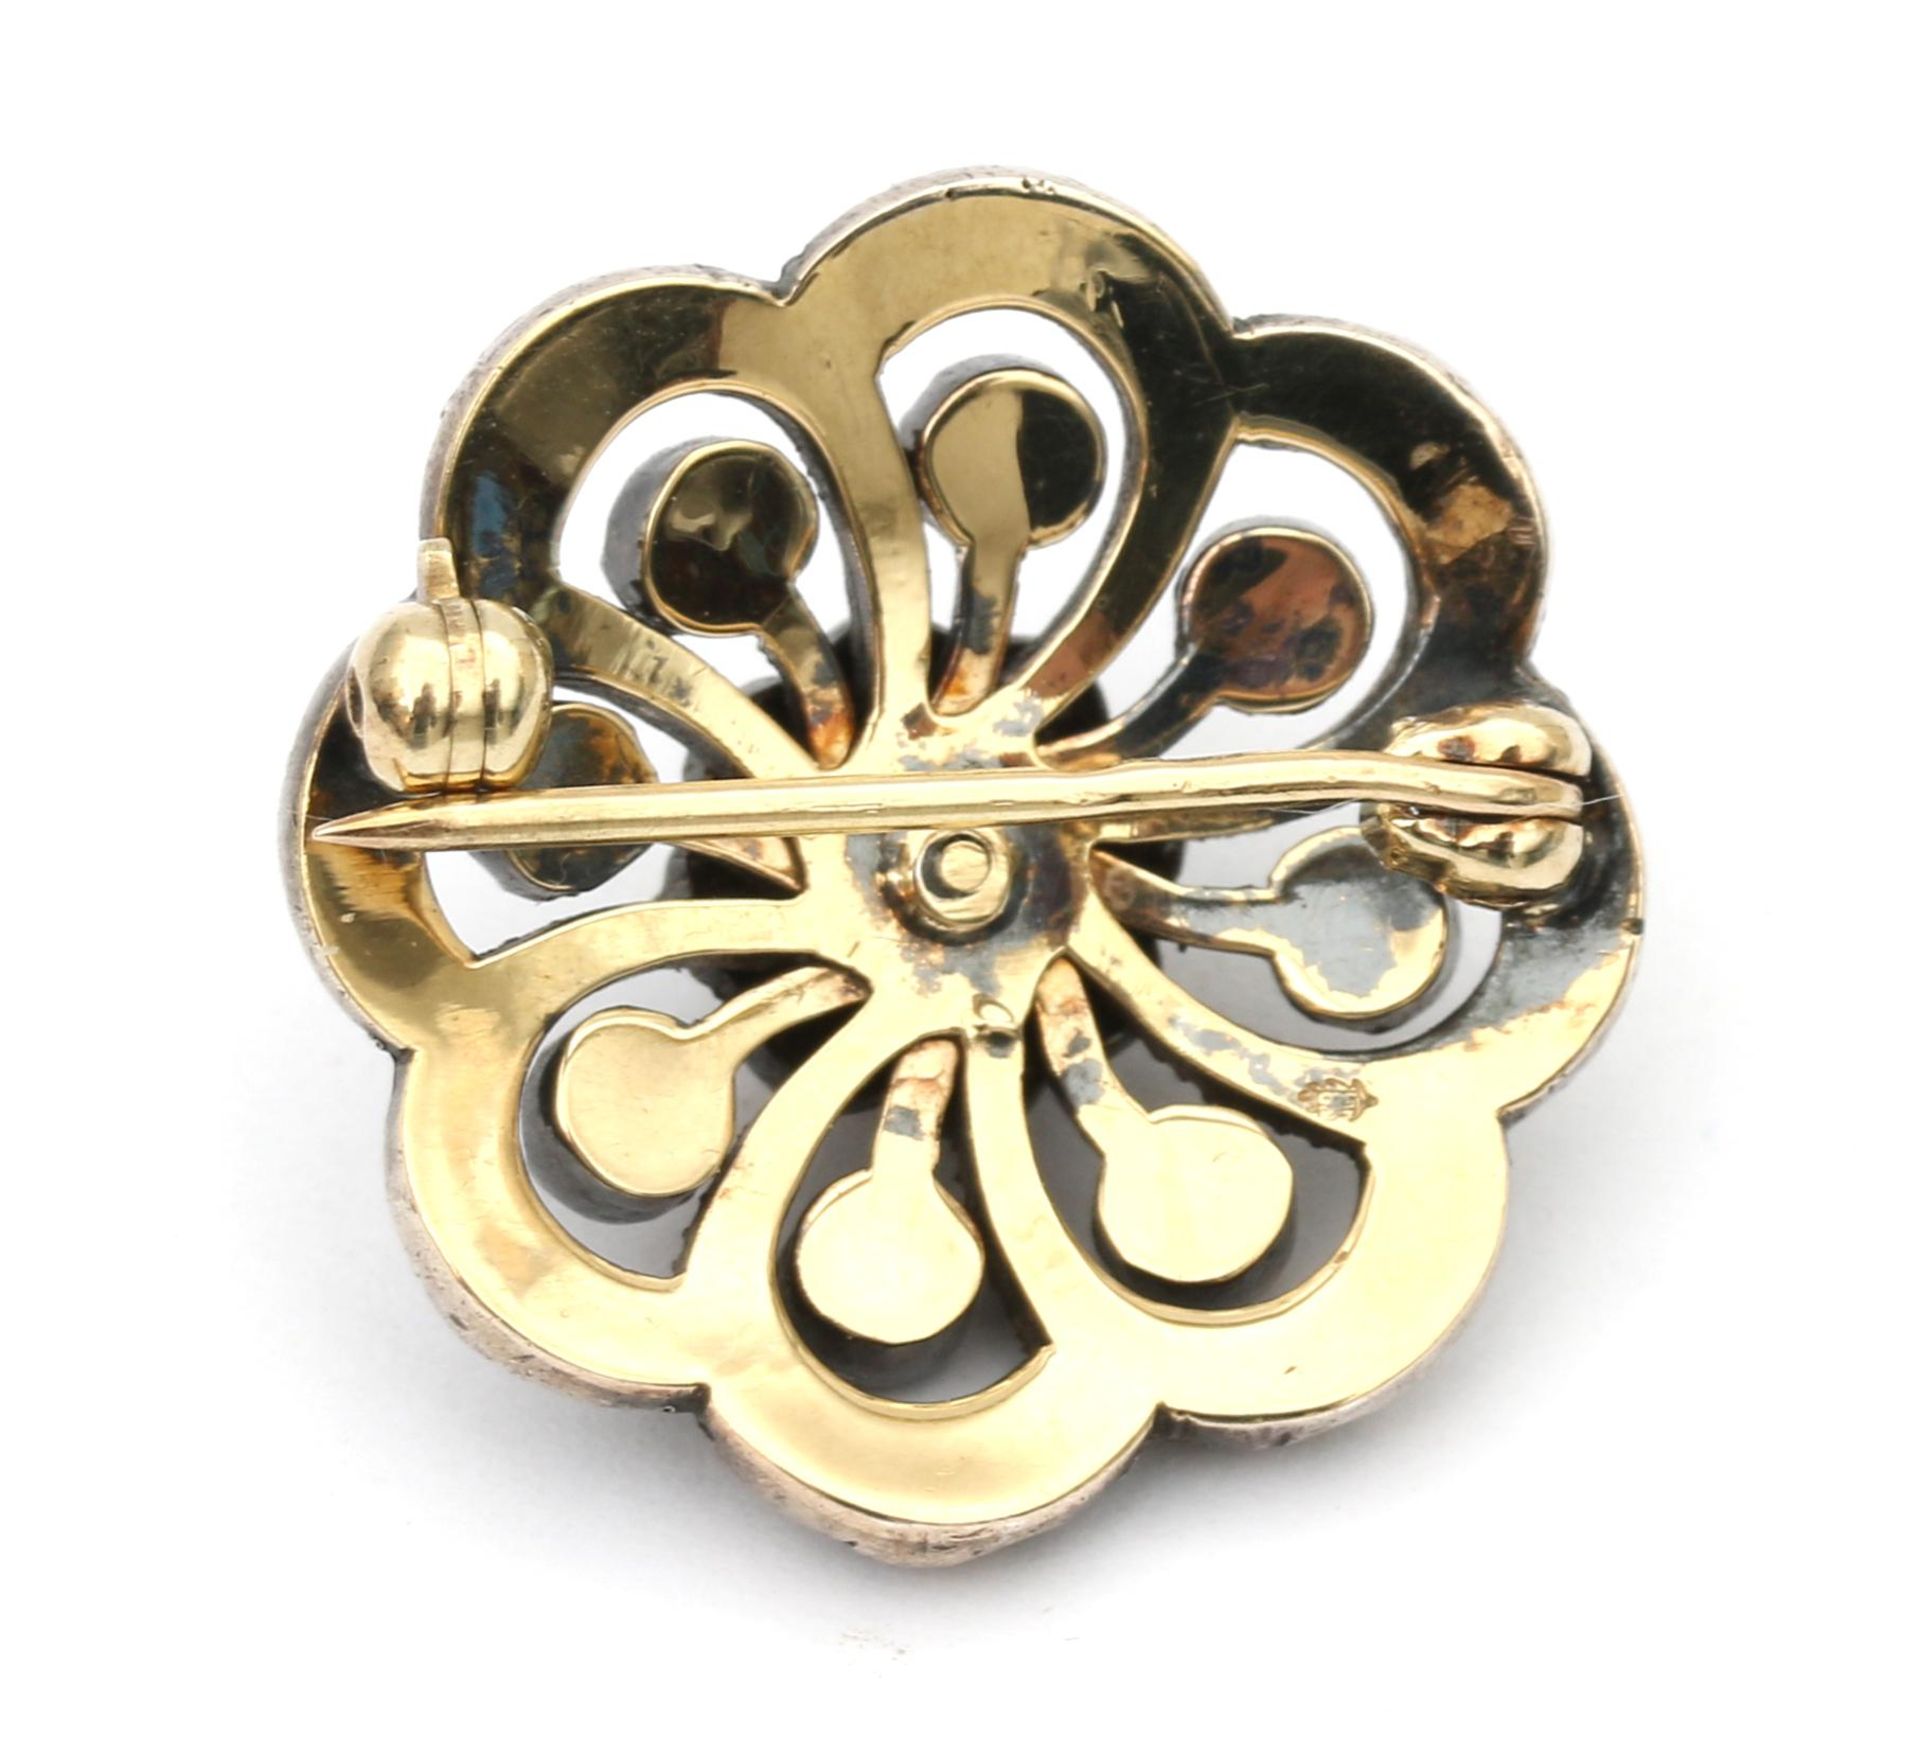 A 14 karat gold and silver rose cut diamond cluster brooch - Image 2 of 2